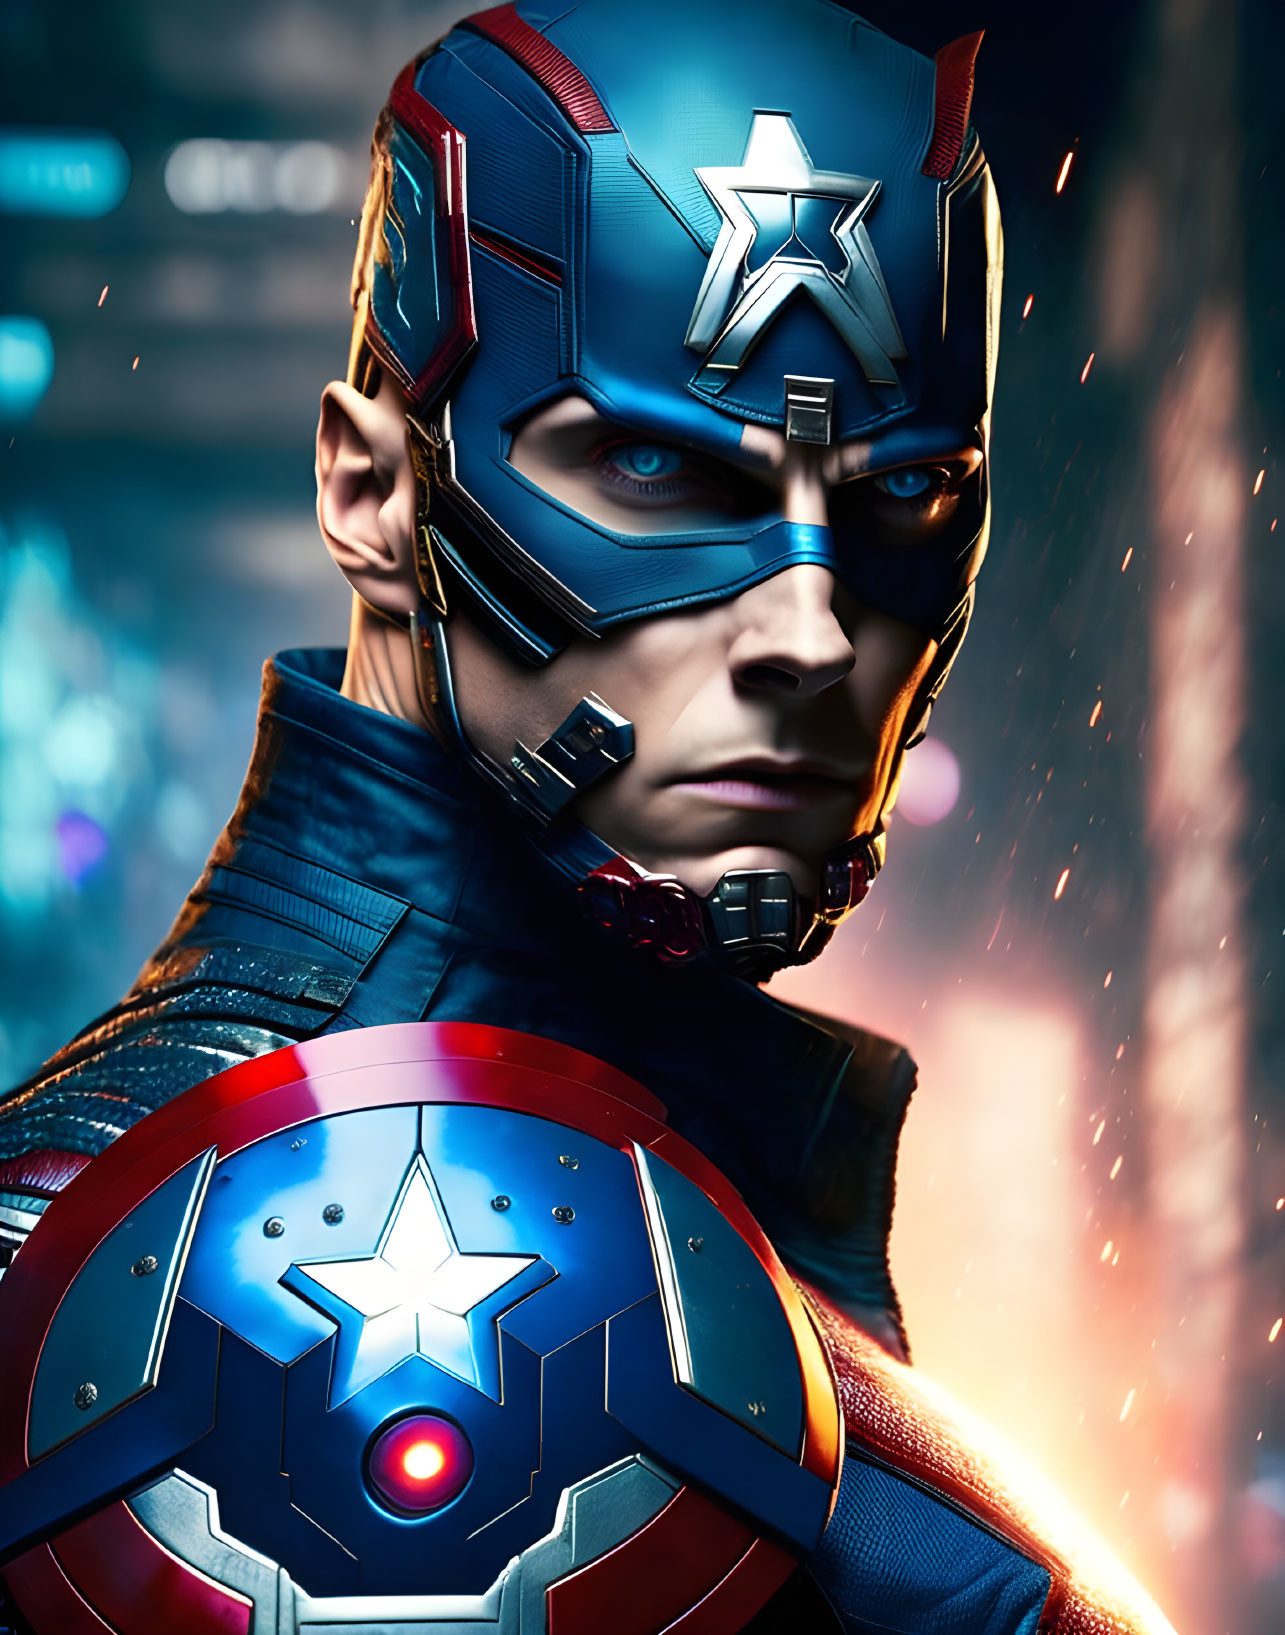 Detailed Captain America costume with glowing elements and futuristic shield.